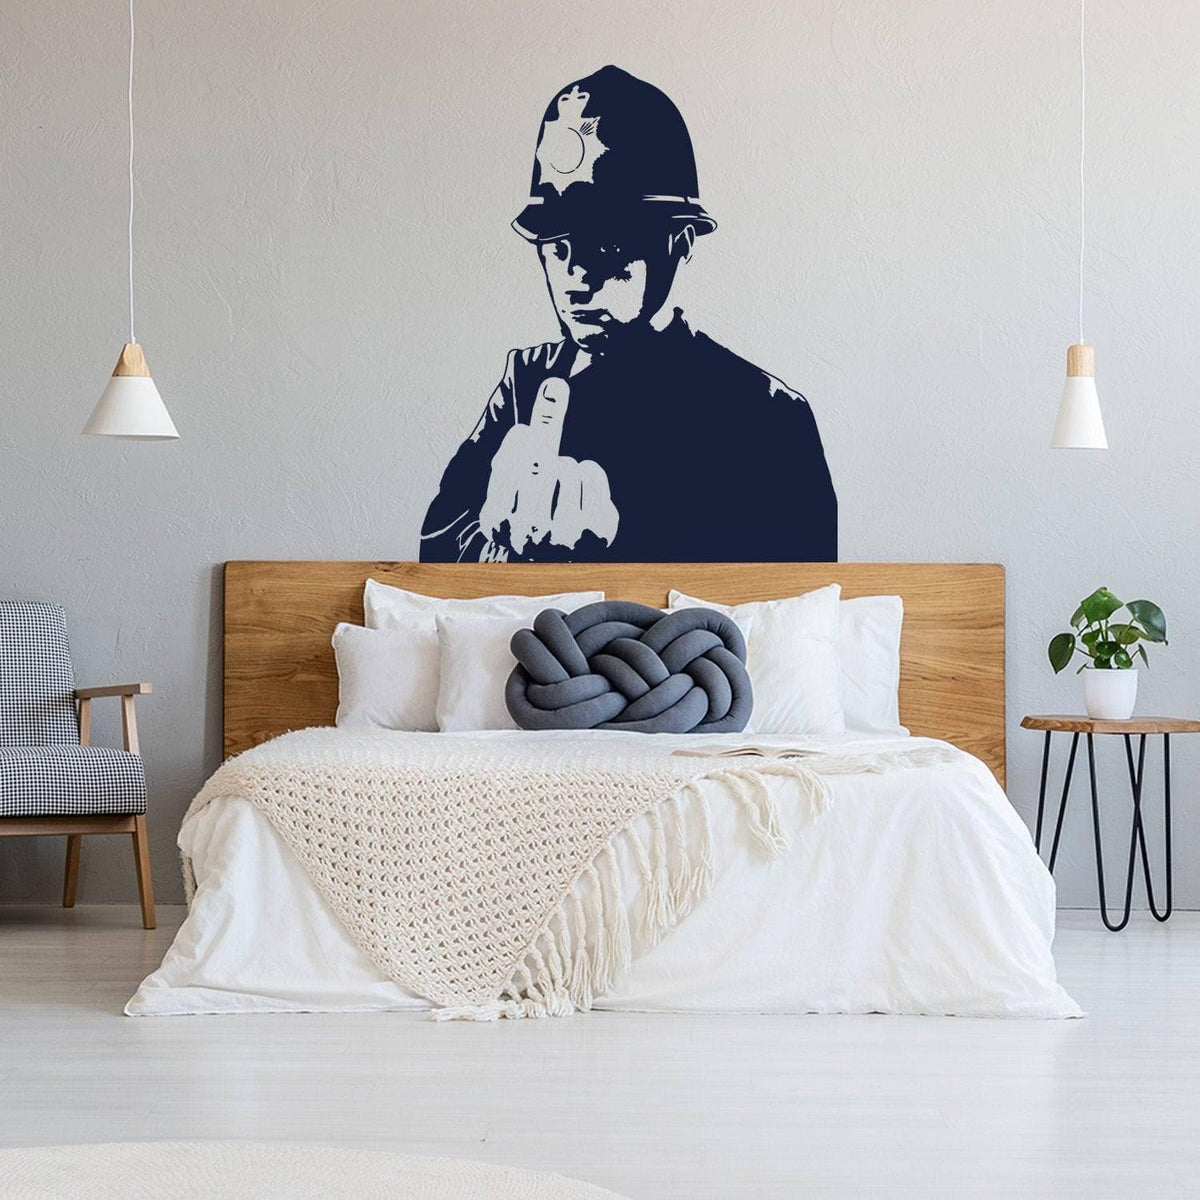 Middle Finger Wall Art